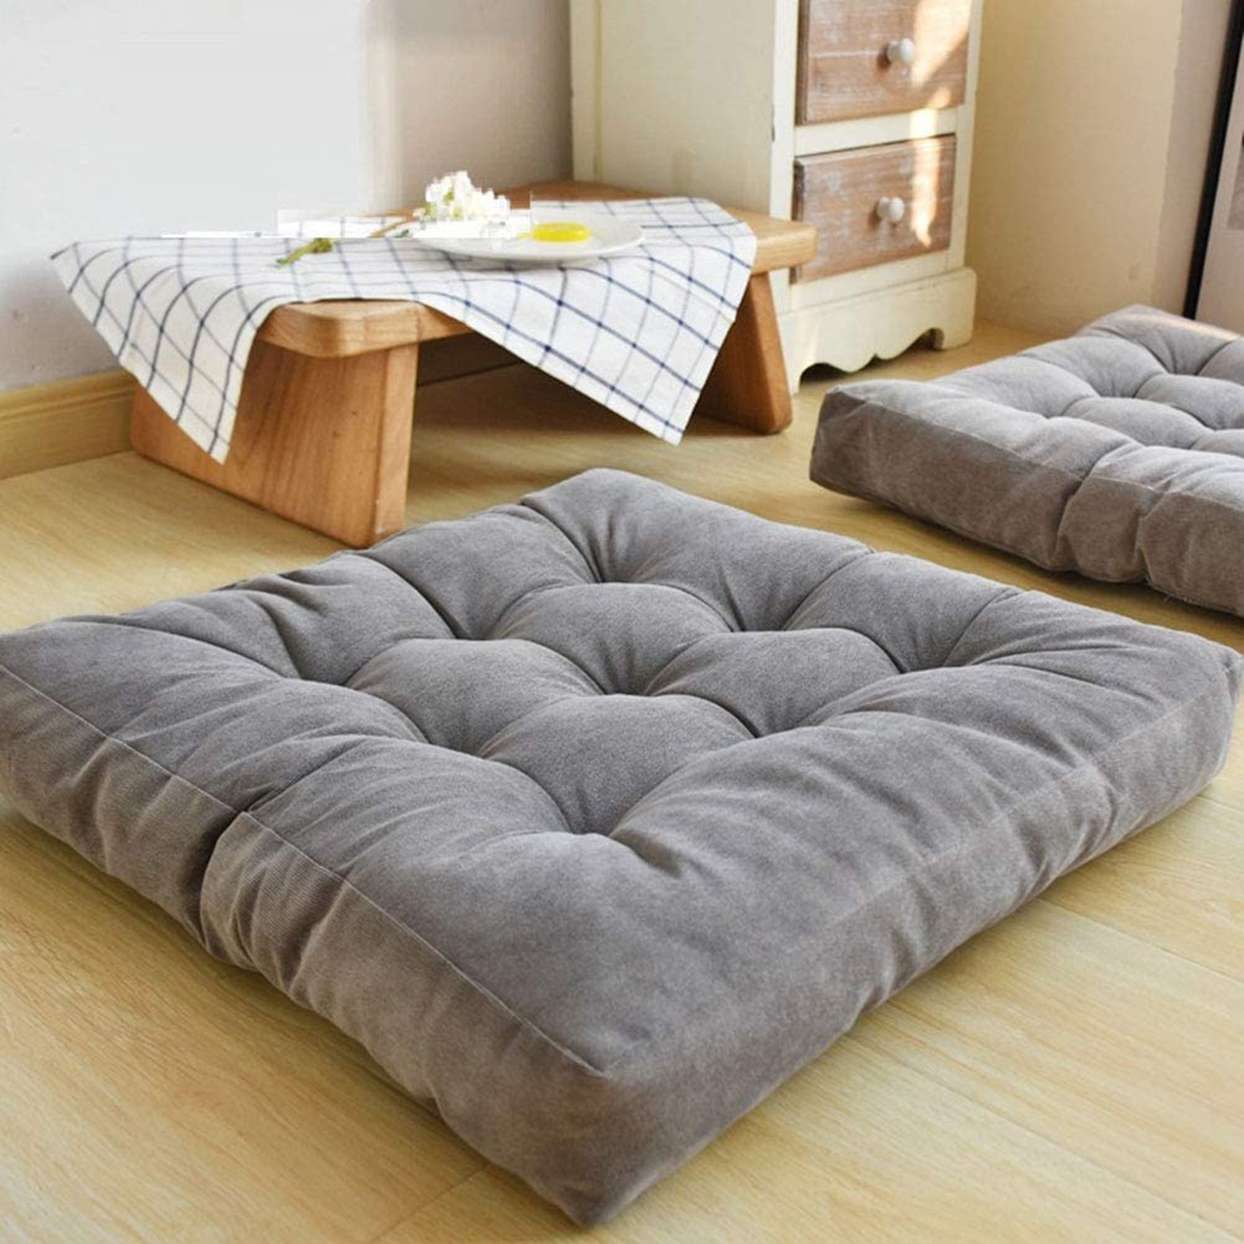 Large square floor pillow